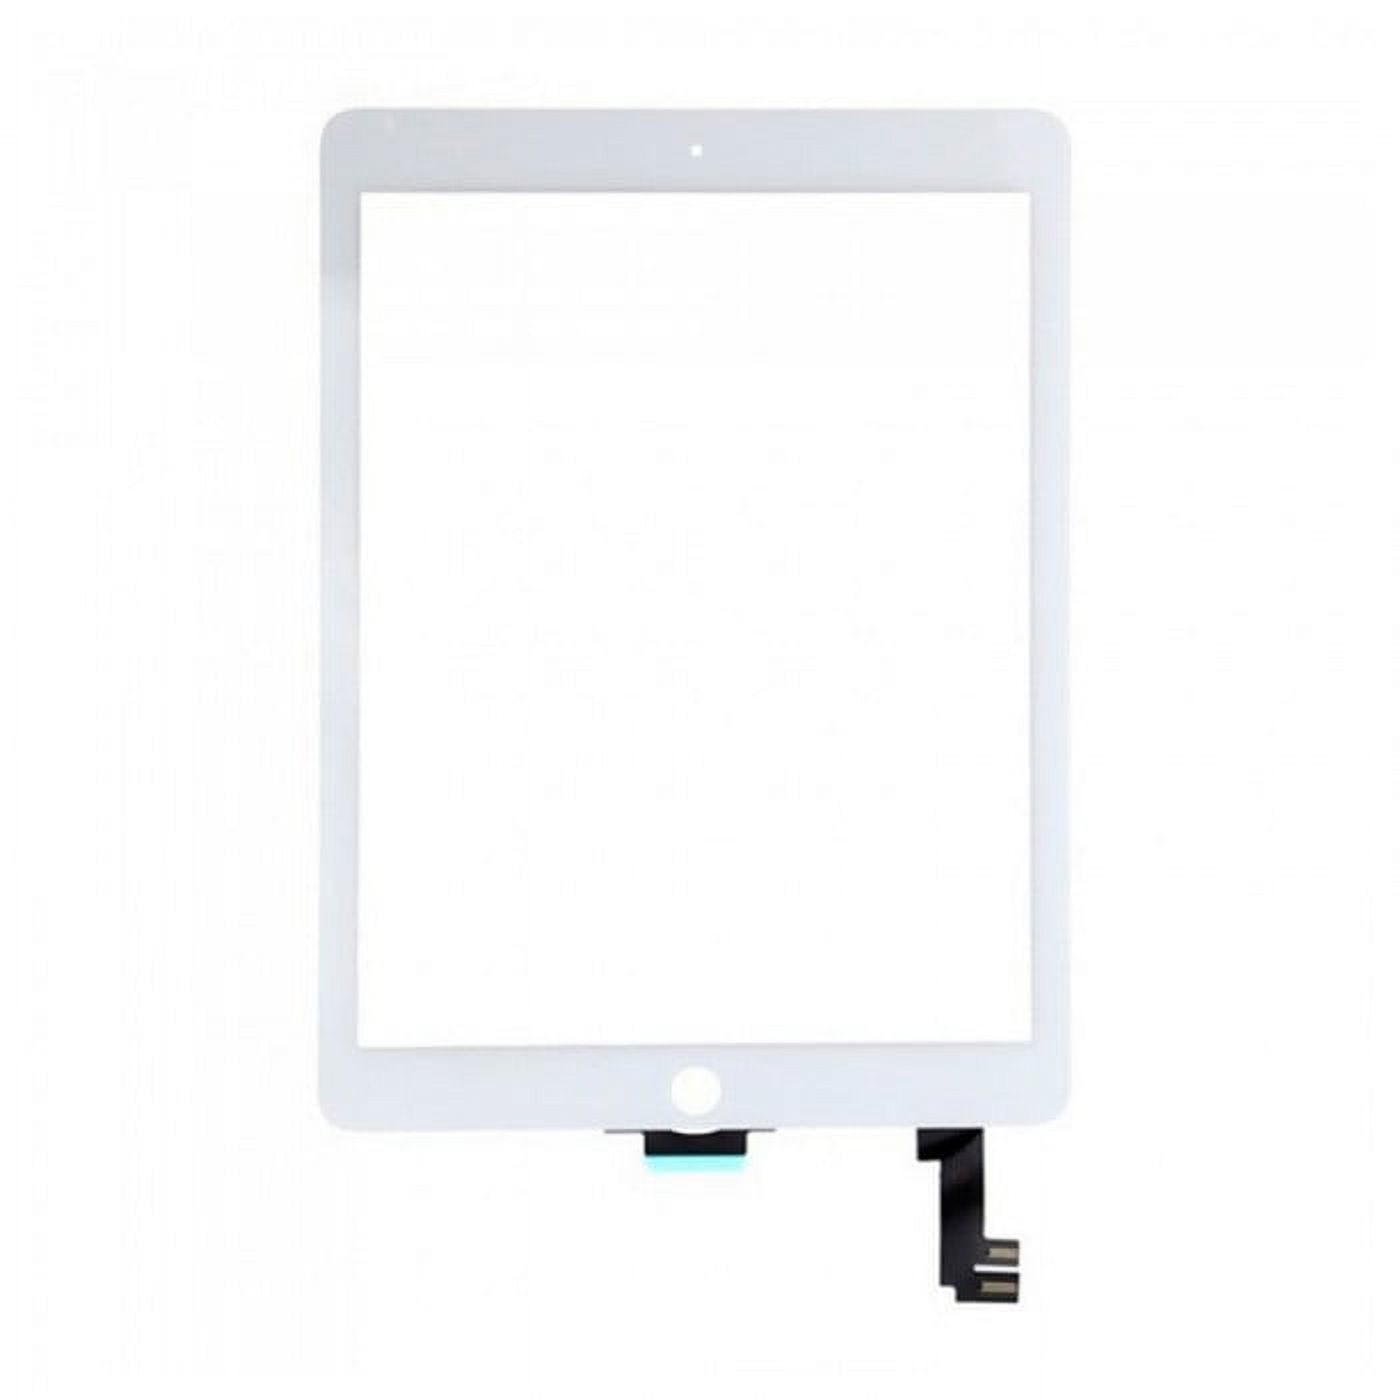 JPUNG for iPad Air 1st Generation Screen Replacement Touch Glass  Digitizer,Only for A1474 A1475 A1476 Air 1st Gen, with Home Button, Full  Repair